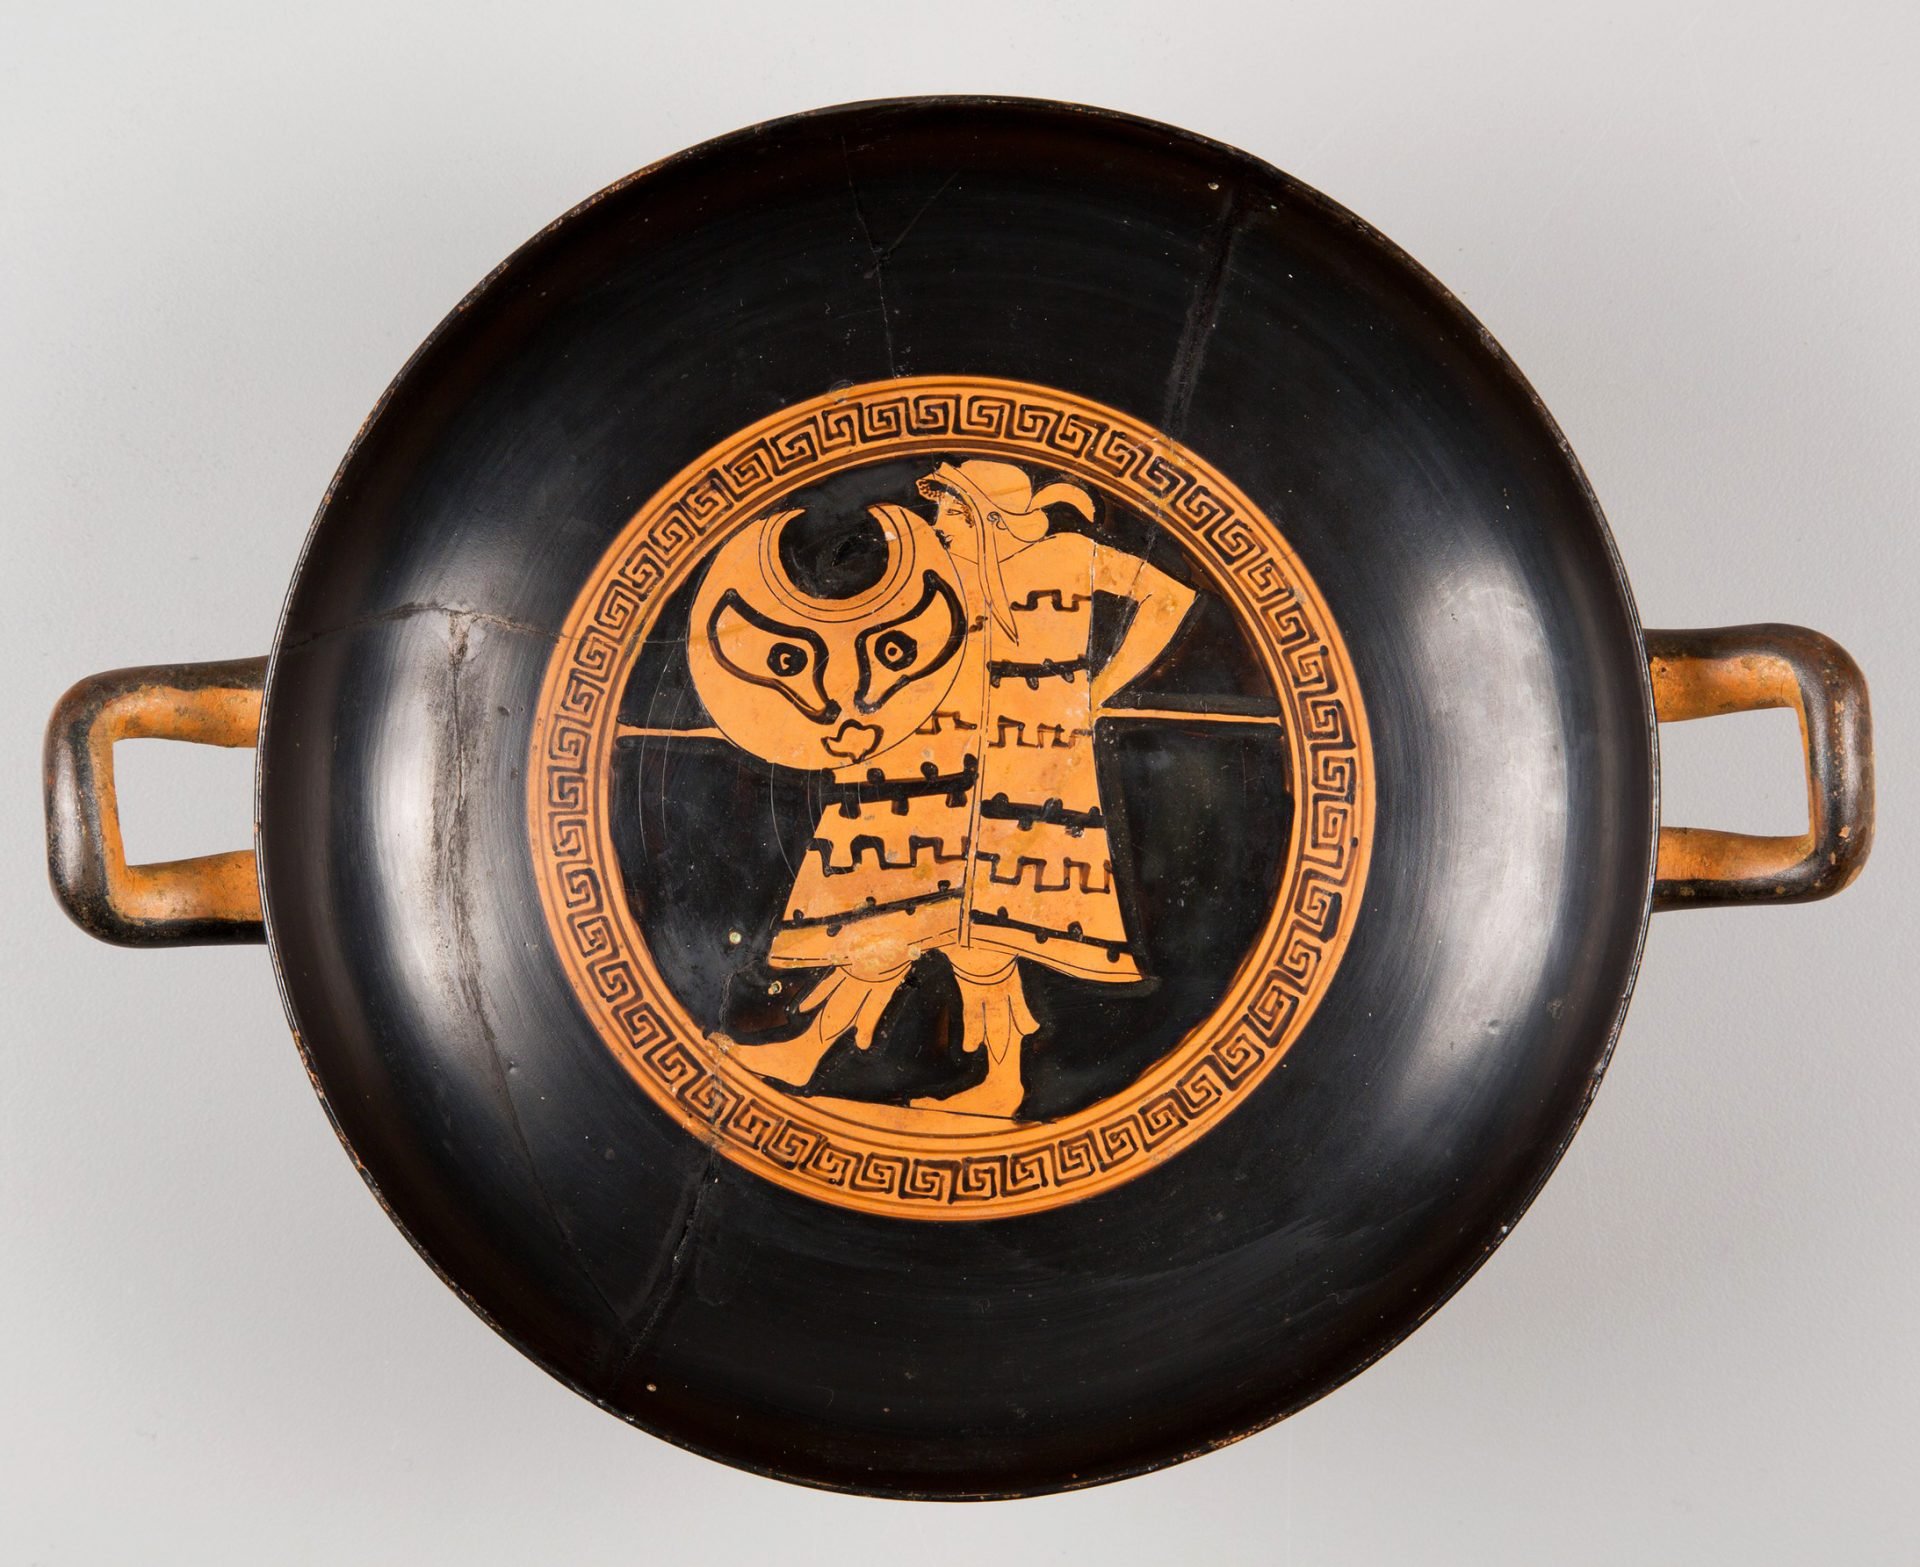 Black and orange painted ancient Greek kylix, or shallow drinking cup, with two handles. The central design features a detailed depiction of a warrior in Thracian attire, surrounded by a circular Greek key pattern.